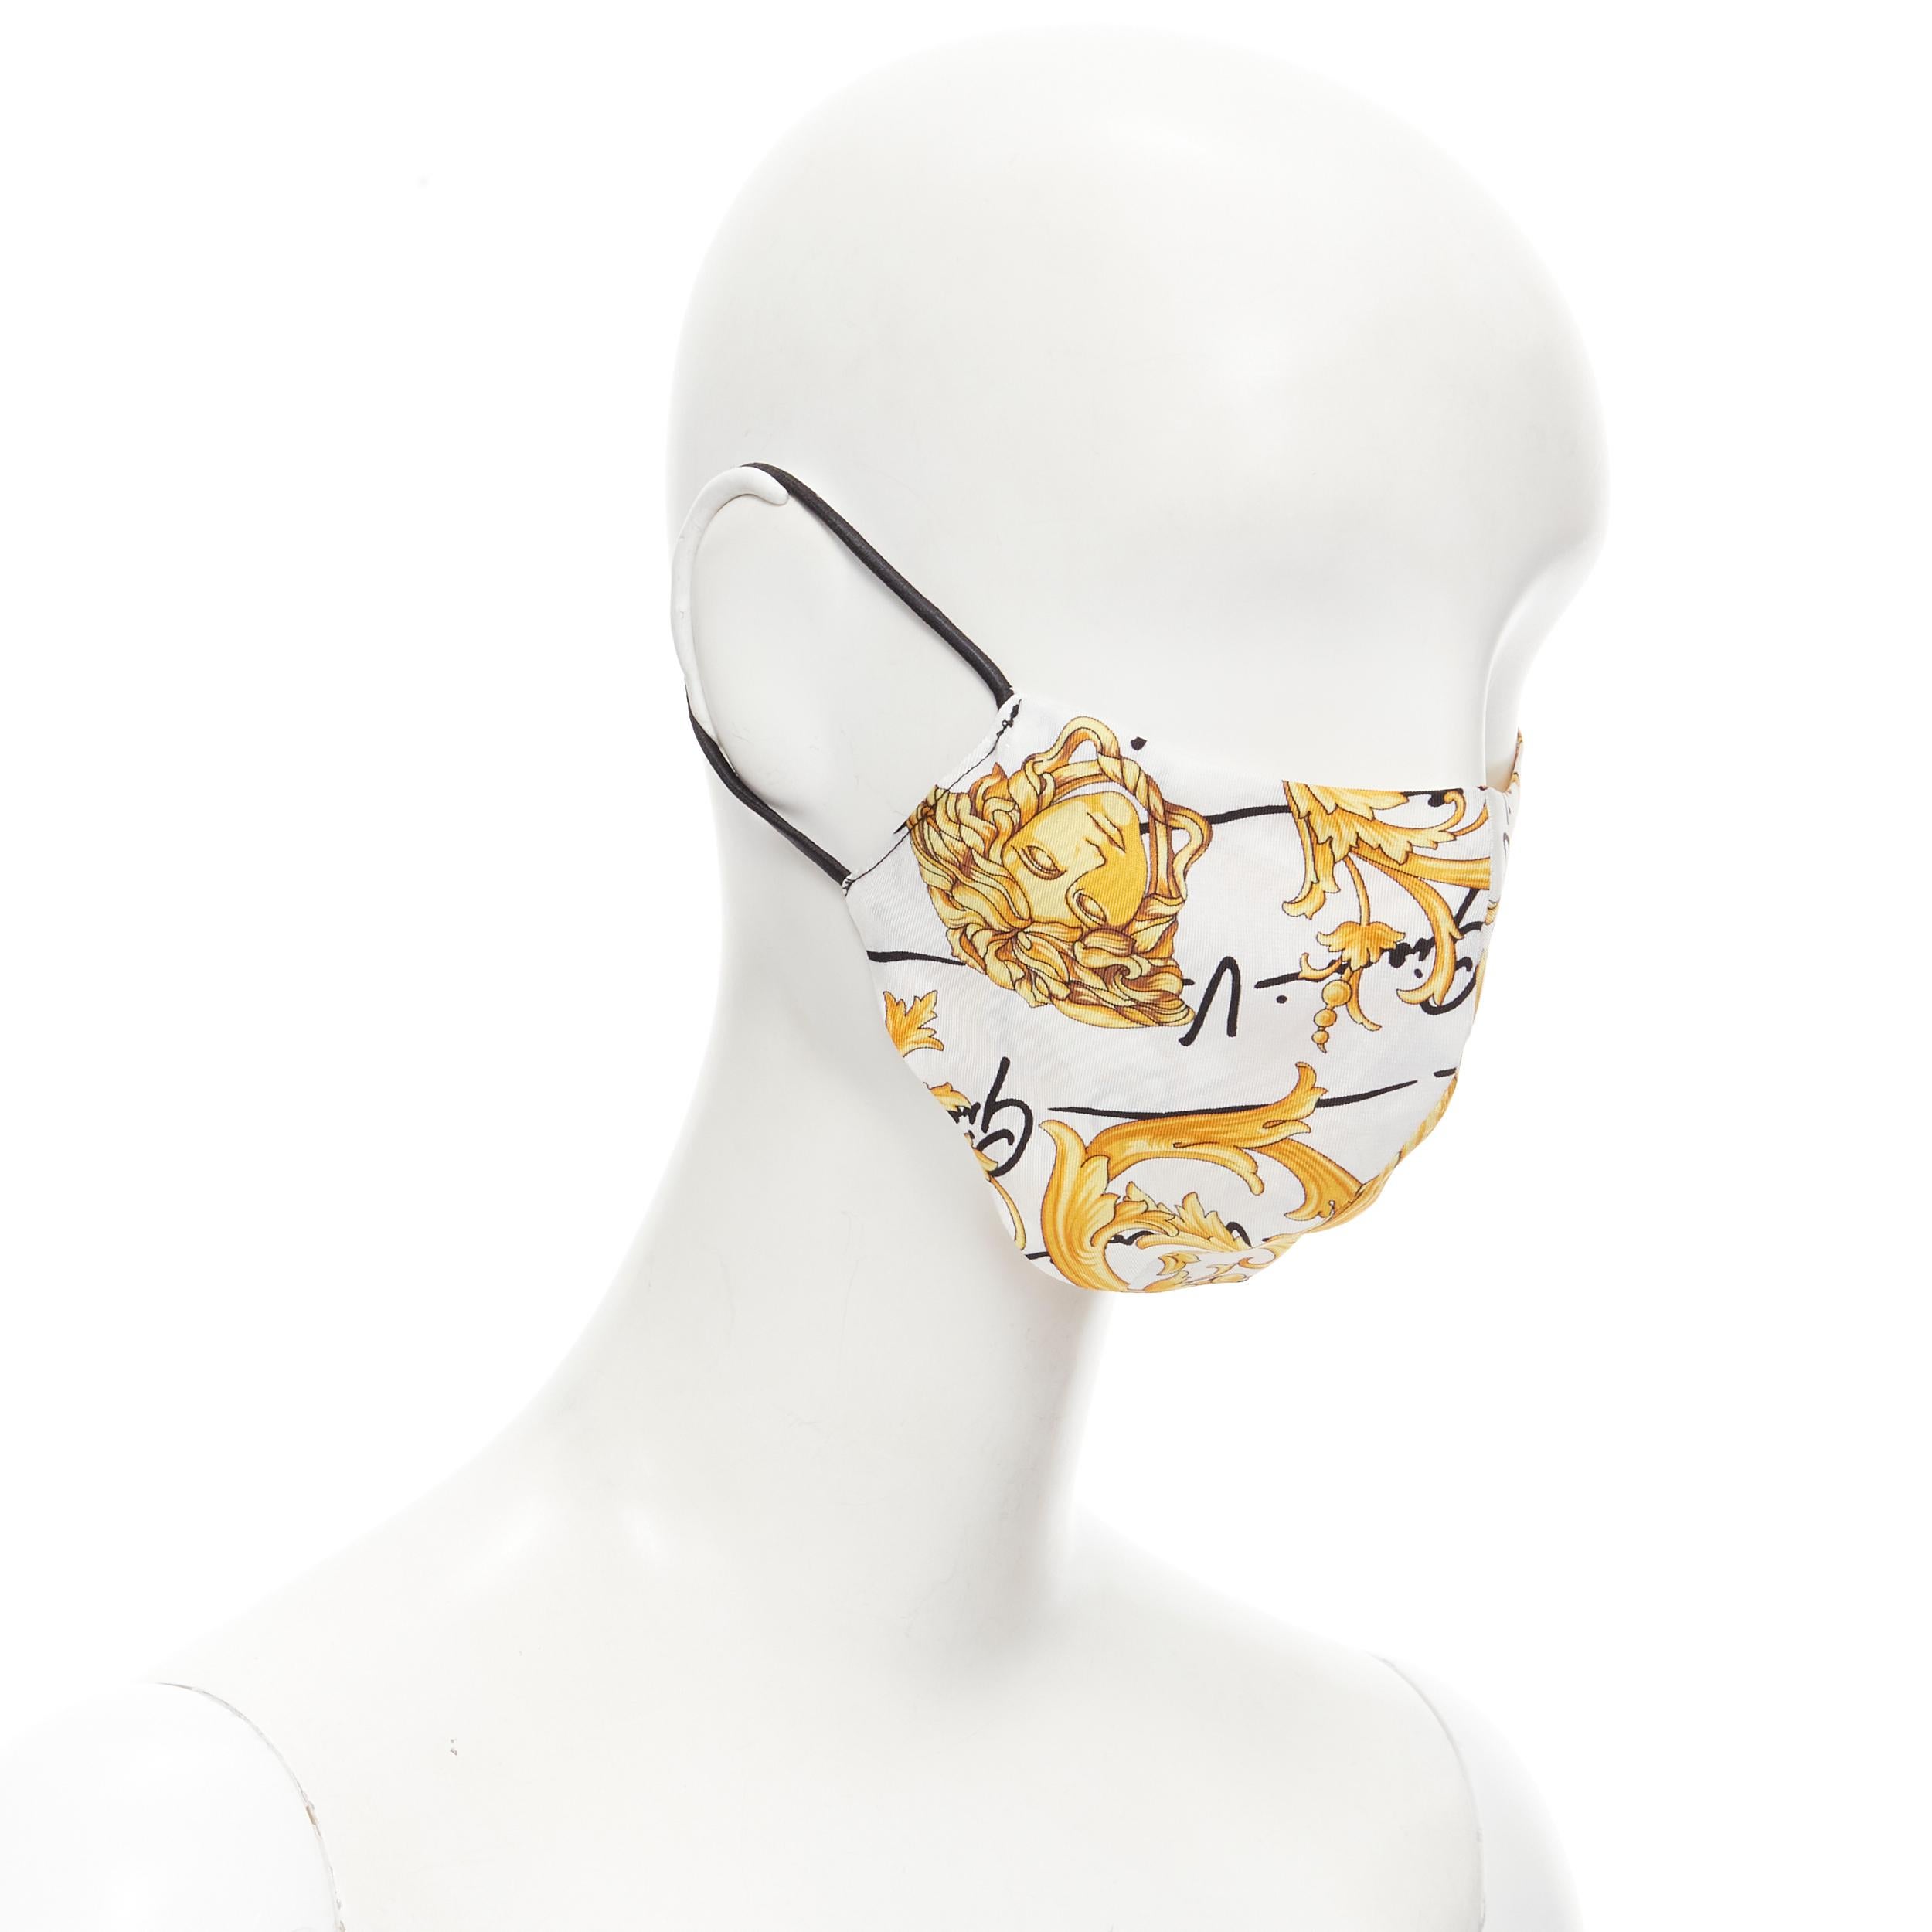 new VERSACE Gianni Signature Barocco Medusa Baroque 100% silk face mask
Reference: CNLE/A00145
Brand: Versace
Designer: Donatella Versace
Model: Barocco silk mask
Collection: Barocco
Material: 100% Silk
Color: White, Gold
Pattern: Floral
Lining: